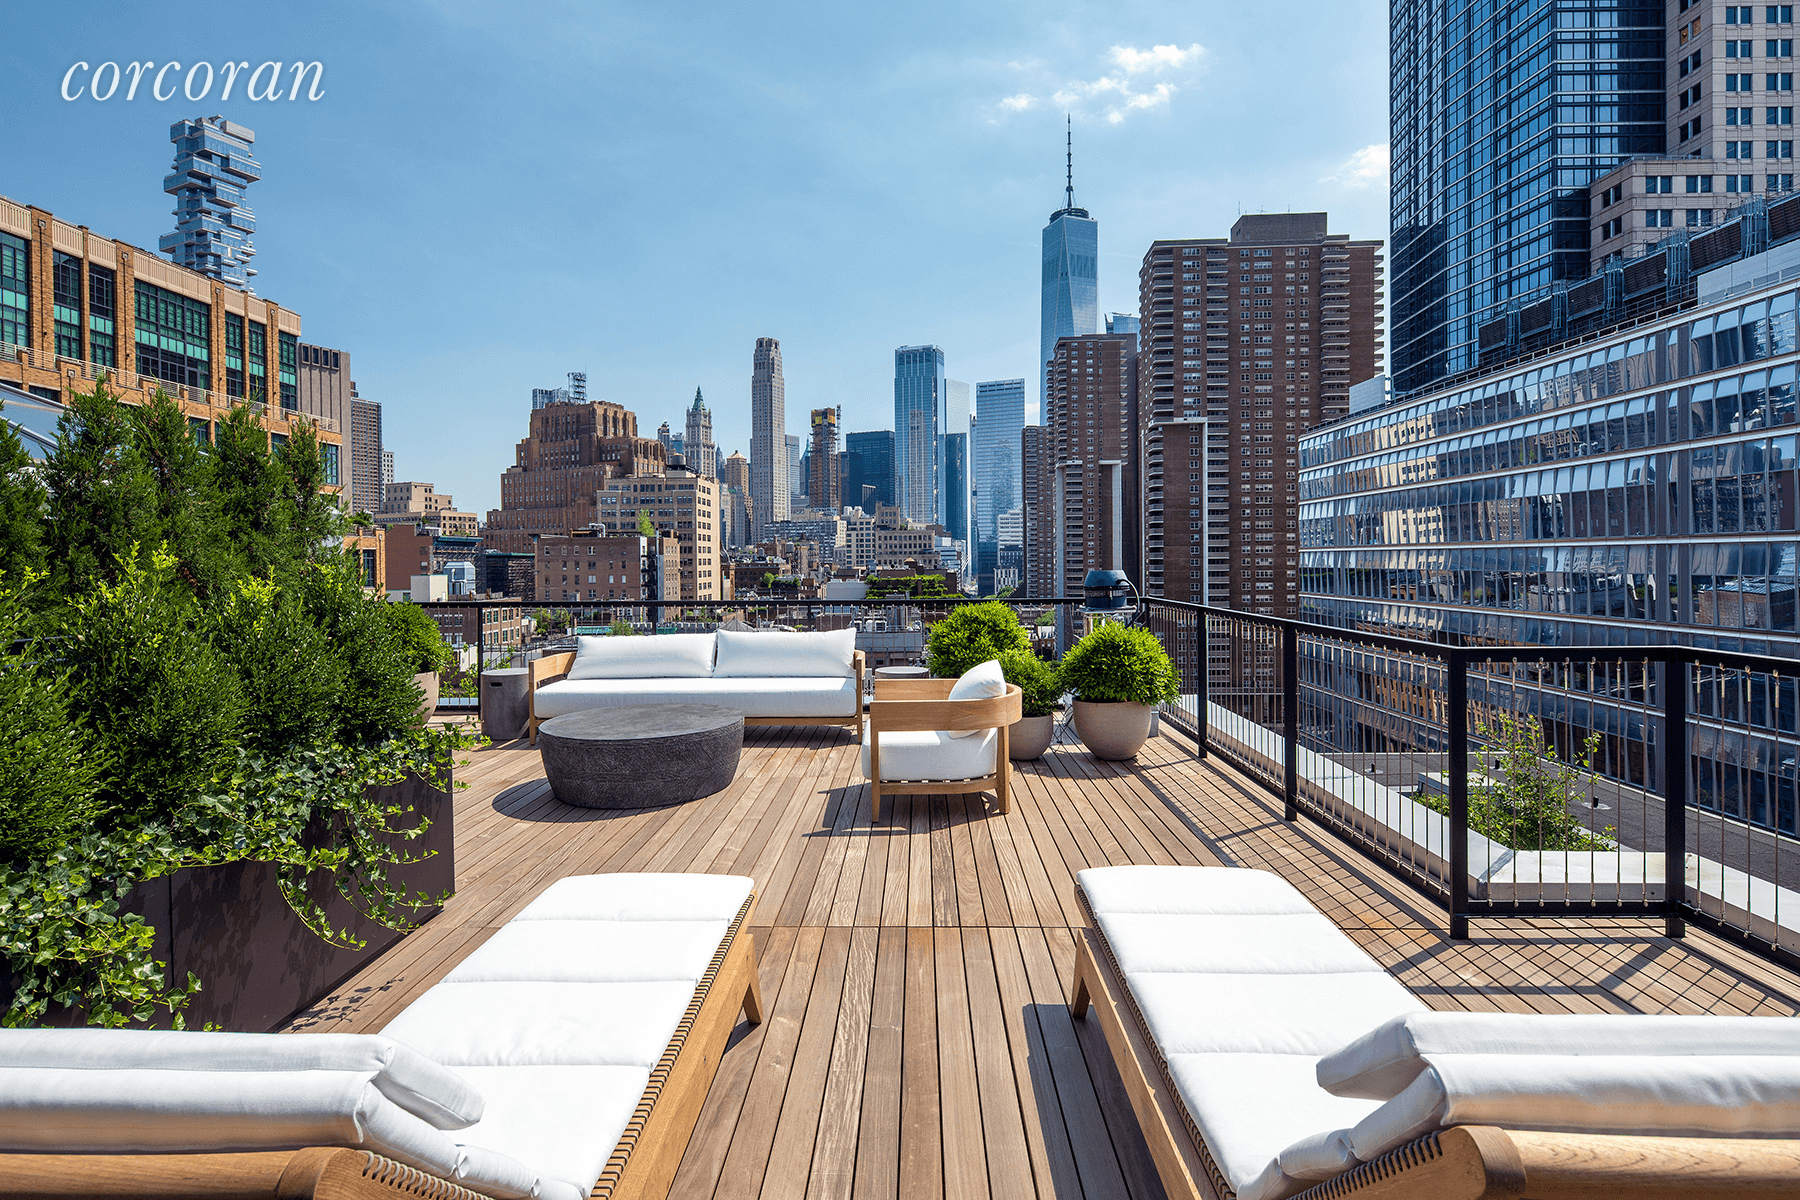 Experience seamless indoor outdoor living and stunning designer details in this meticulously 3 year gut renovated penthouse duplex featuring 4 5 bedrooms, 4.